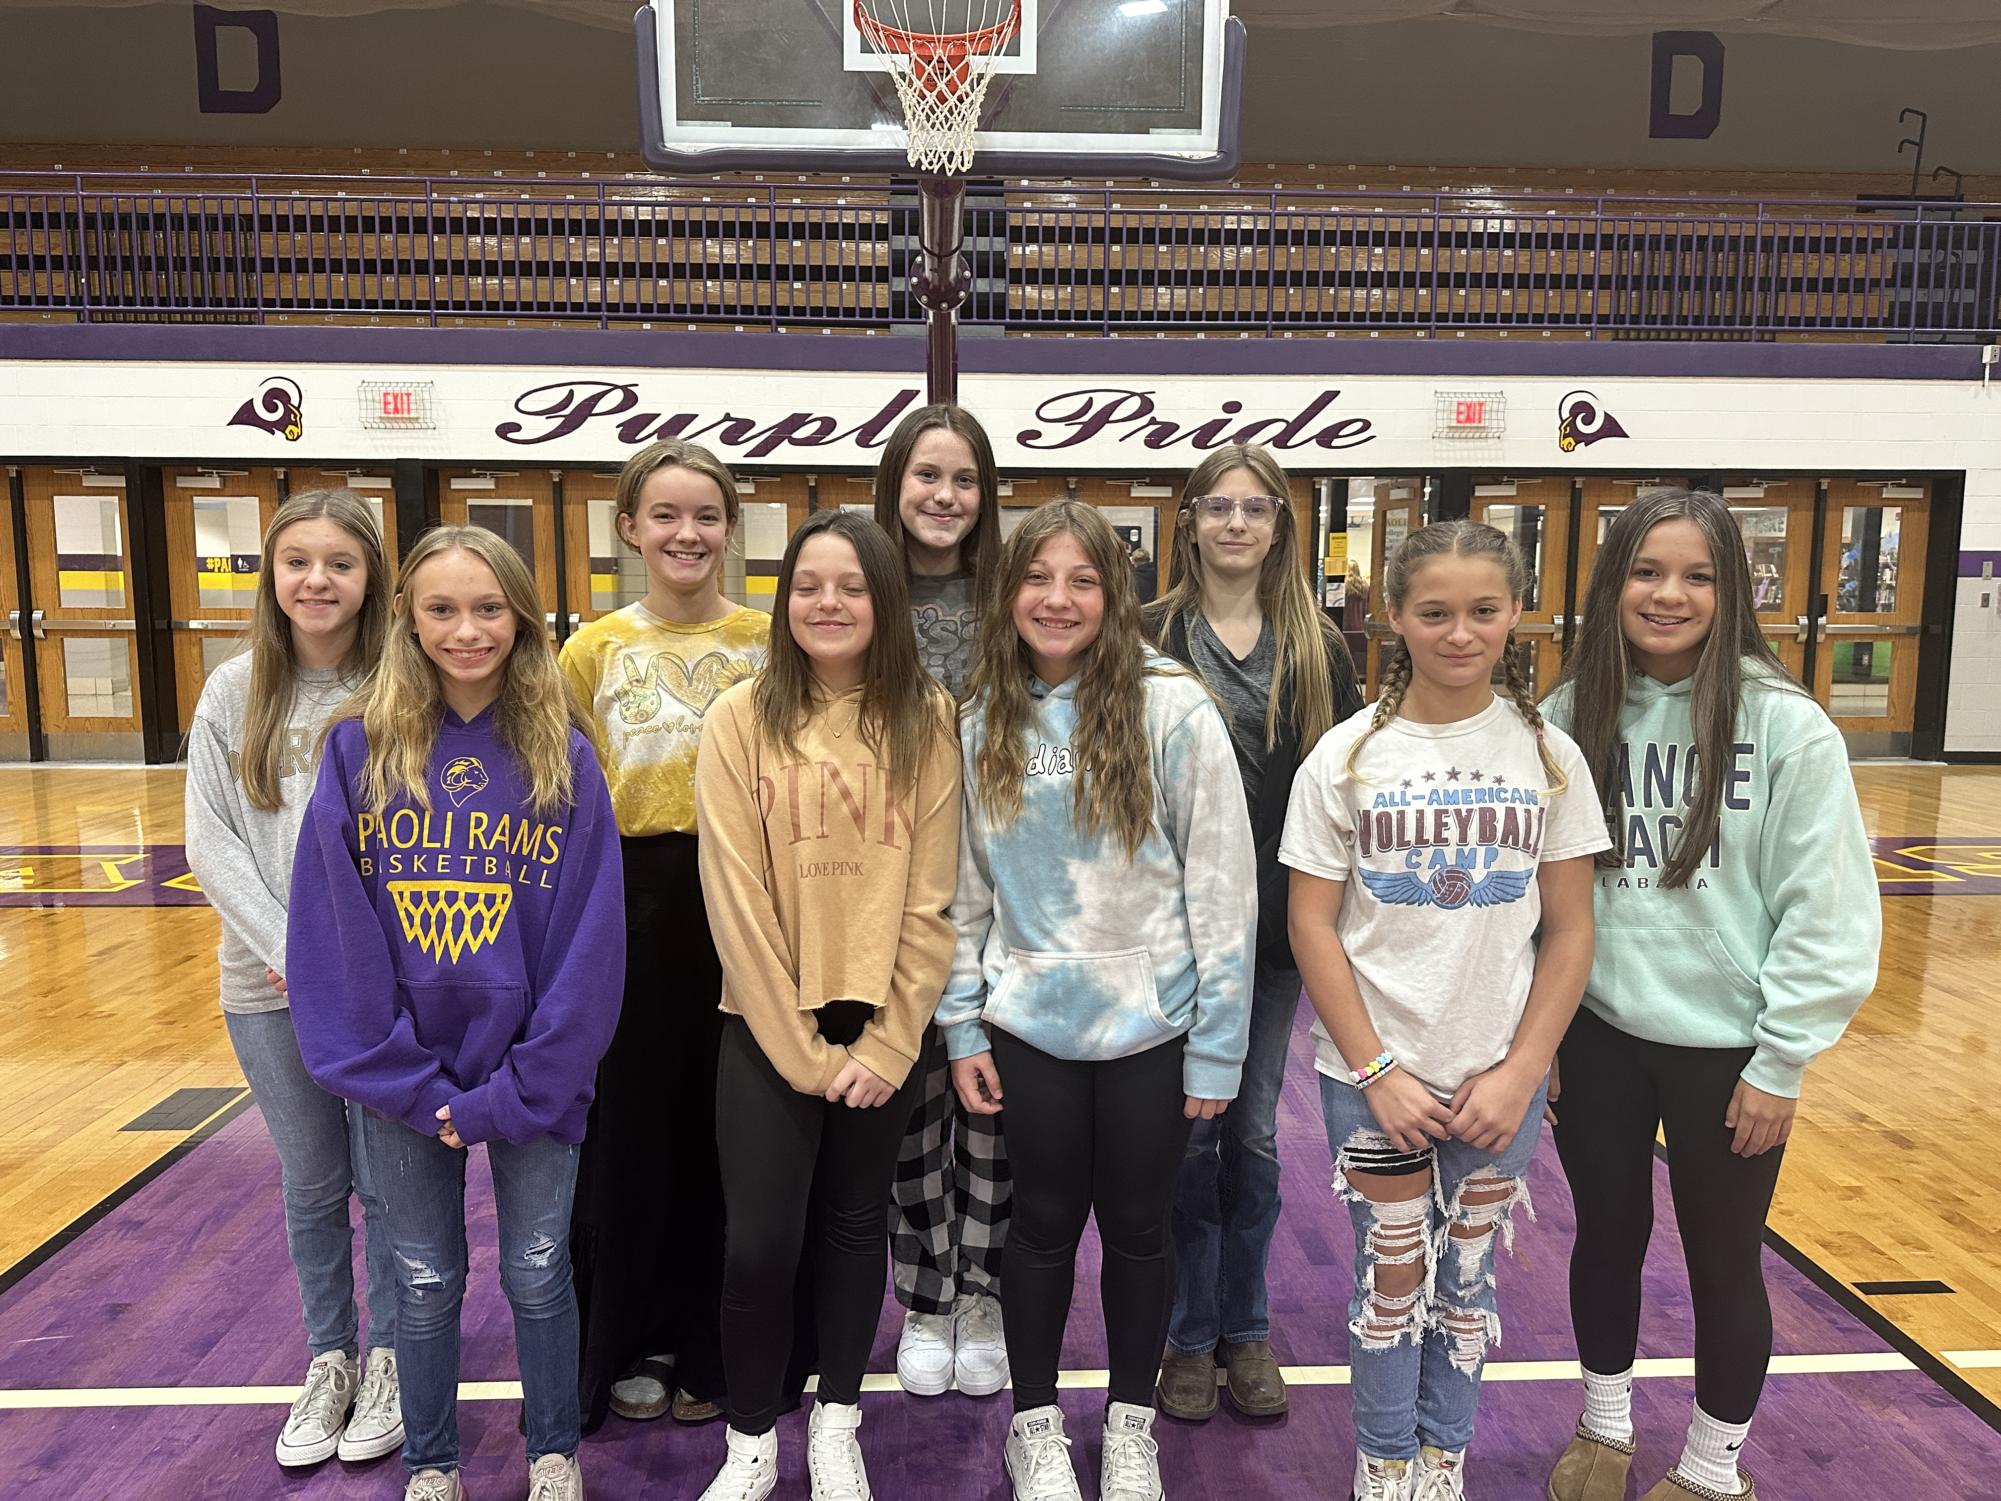 The new members of the JH Cheer team are eighth graders Maria Chastain, Kira Clements and Braylyn Nadeau, and seventh graders Taylyn Bledsoe, Rhianna Chavez, Kylie Frank, Chloe Flannery, Lydia Fulkerson and Jozie Simcox. 